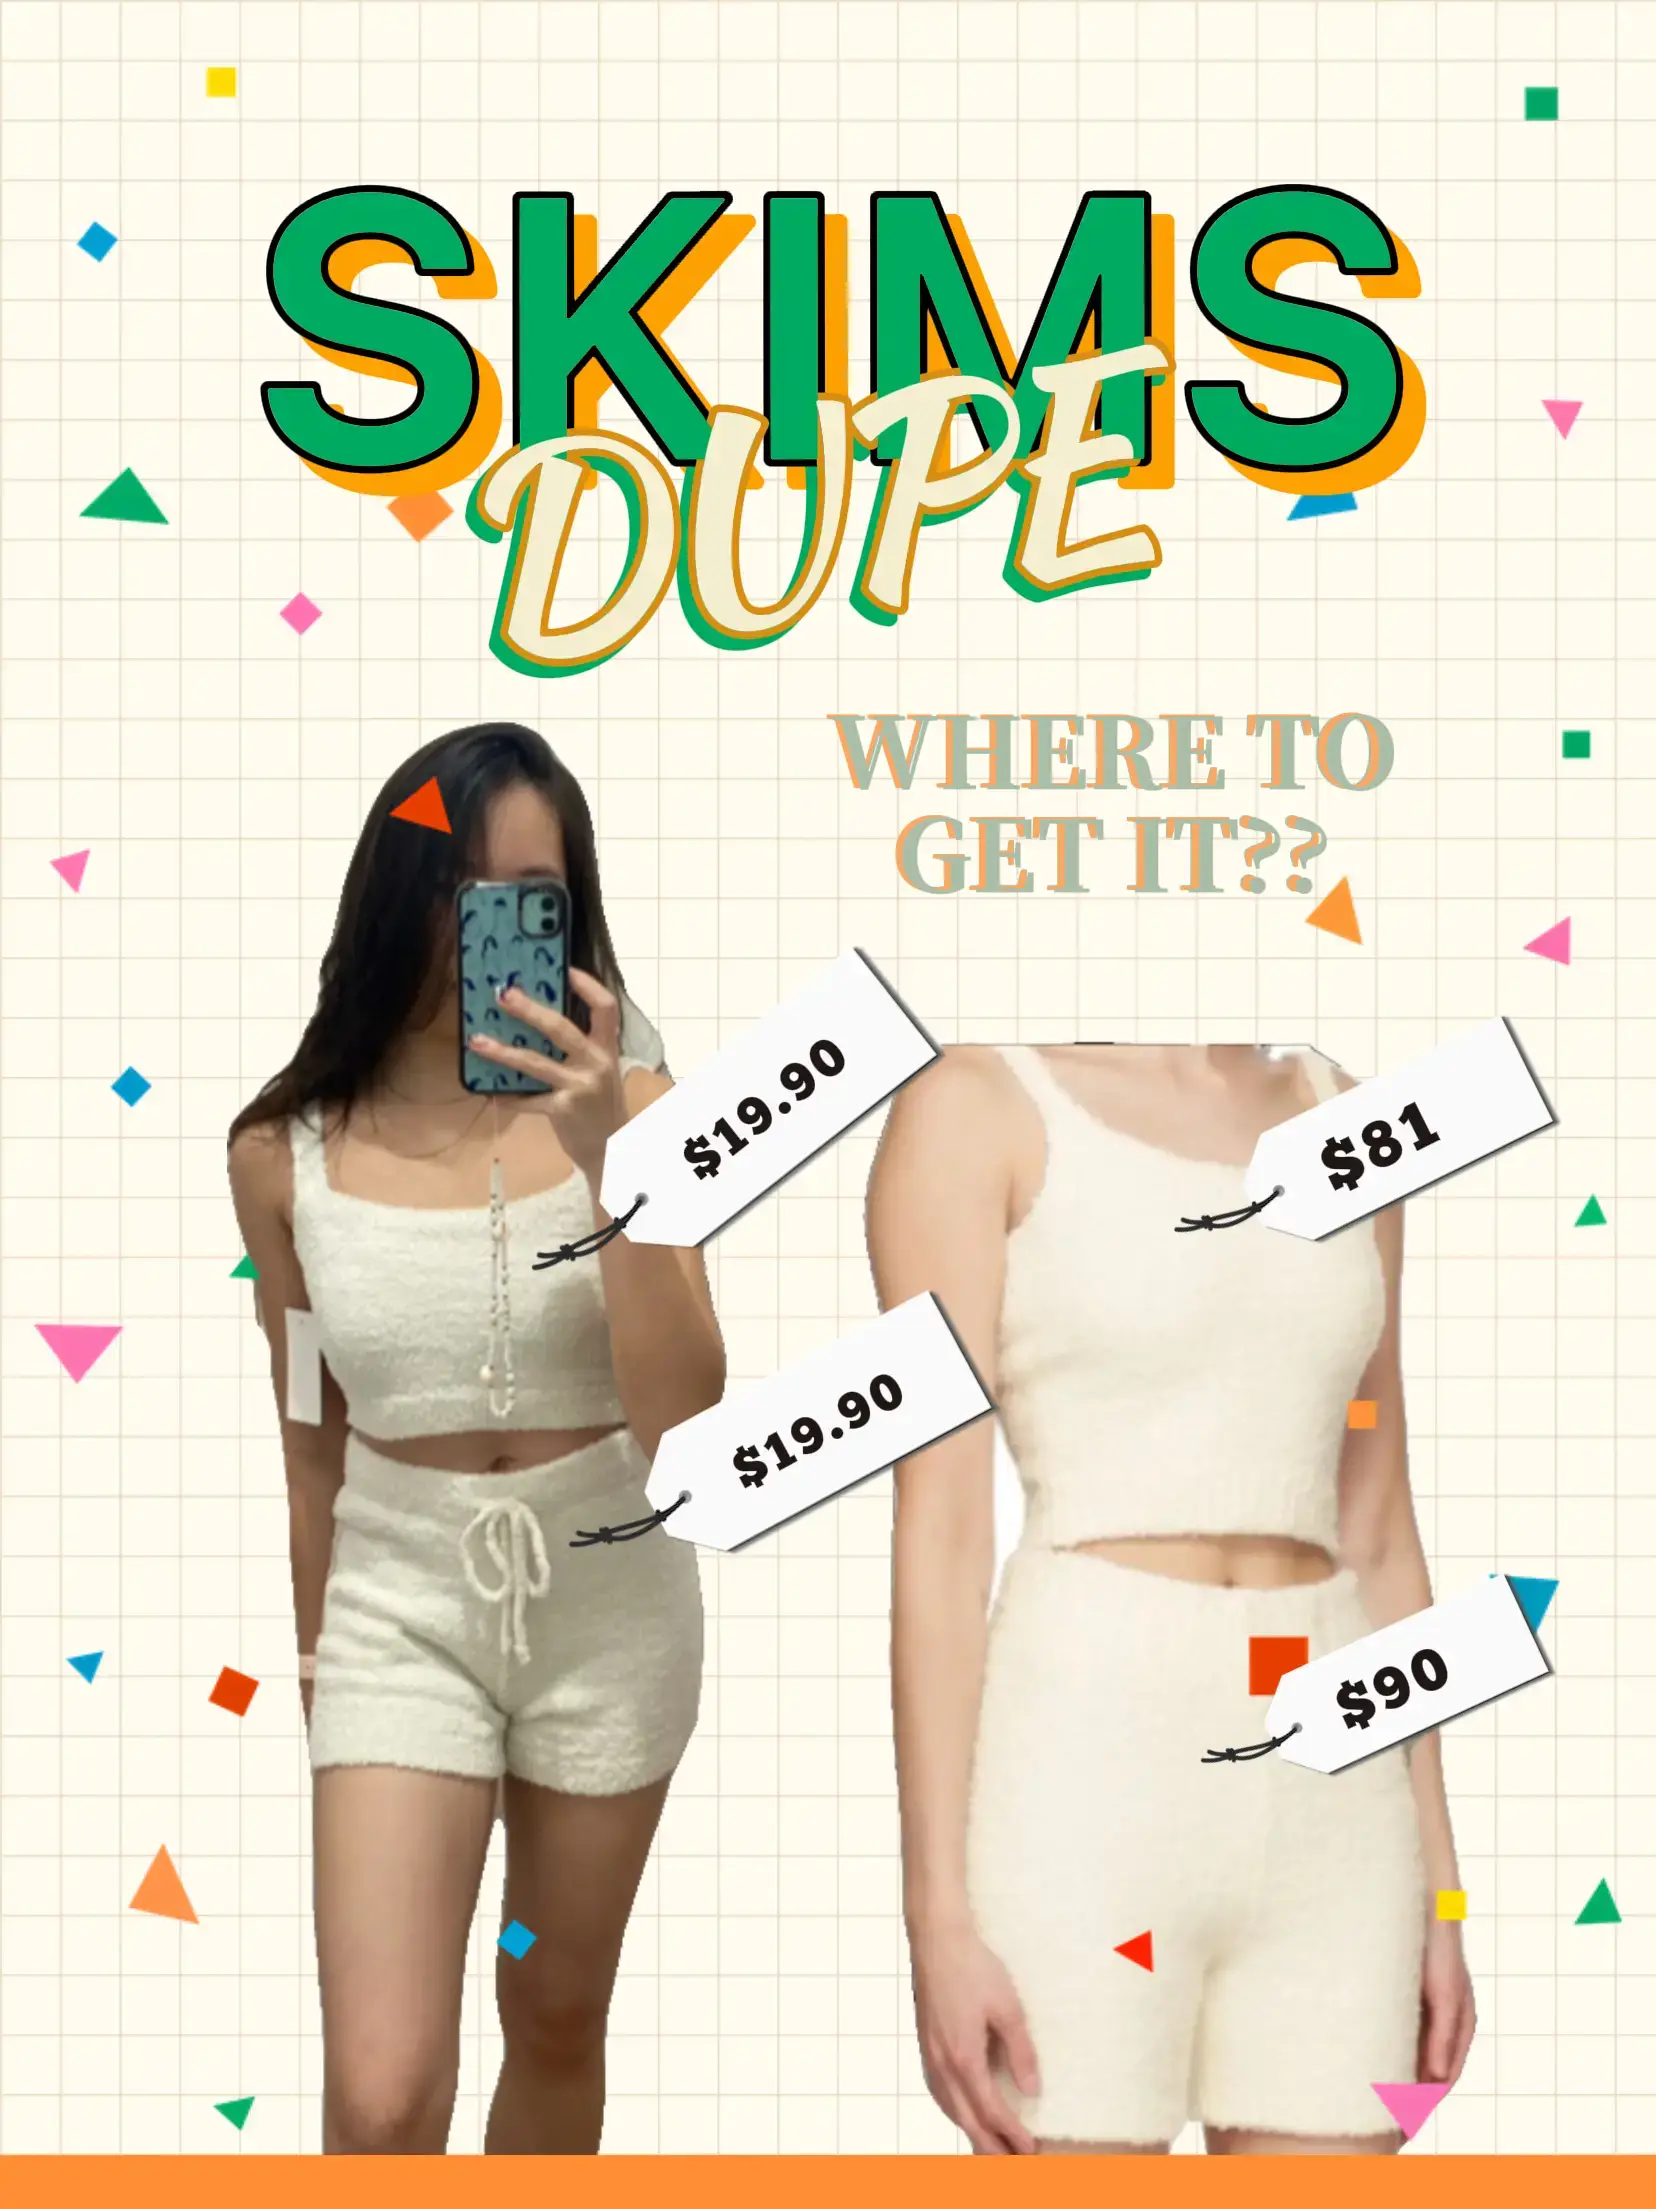 I'm midsize and found the best bargain Skims dupes on